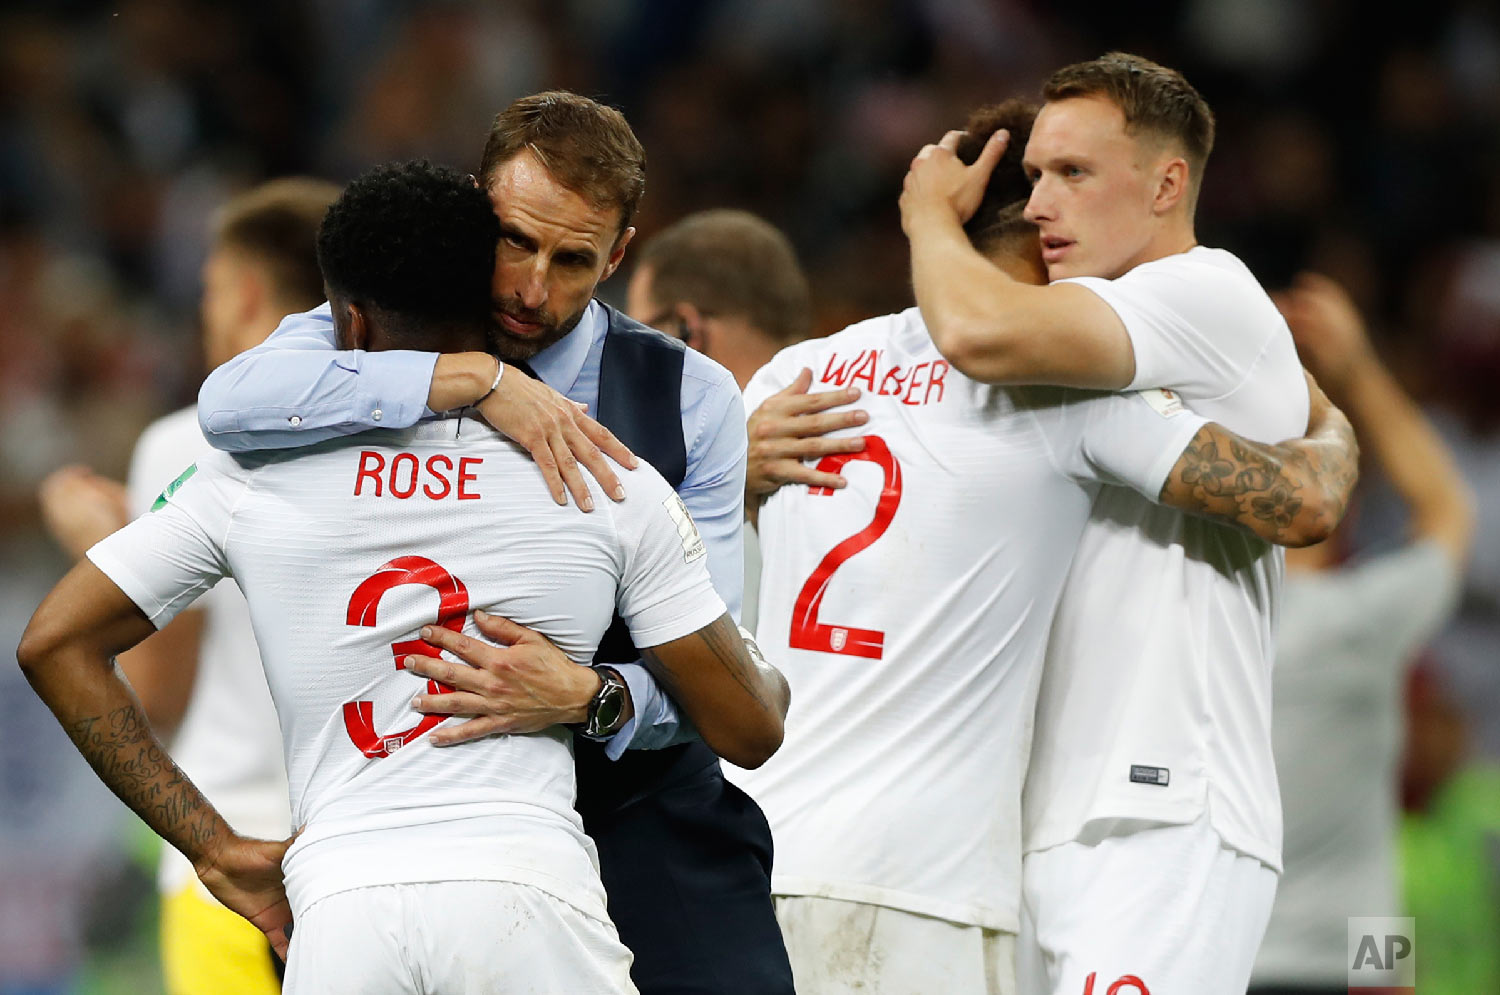  England head coach Gareth Southgate, 2nd left, comforts England's Danny Rose, left, after loosing the semifinal match between Croatia and England at the 2018 soccer World Cup in the Luzhniki Stadium in Moscow, Russia, Wednesday, July 11, 2018. (AP P